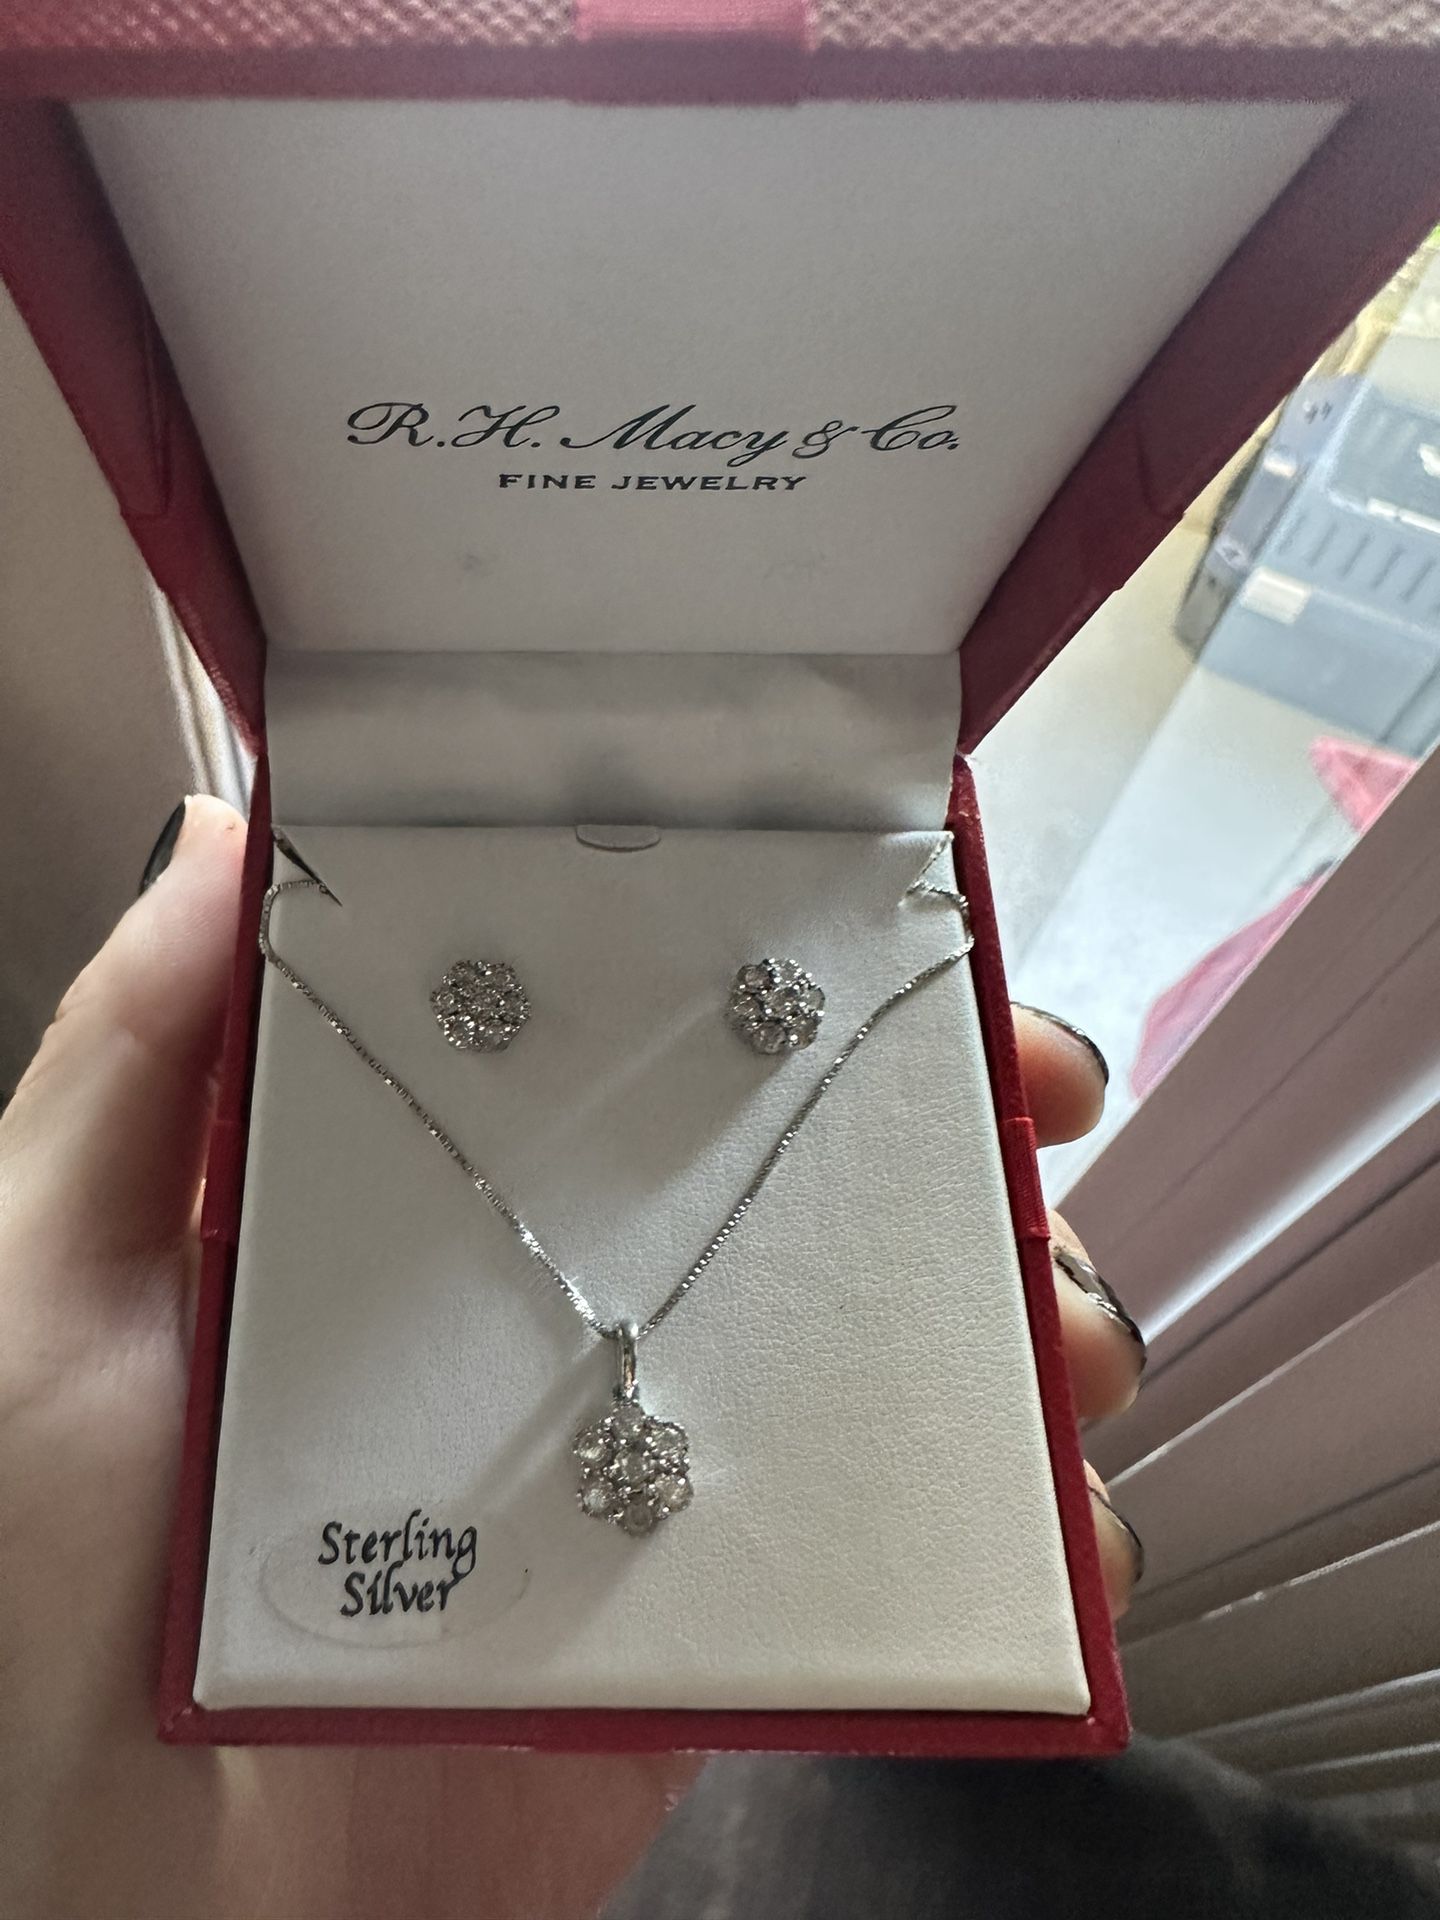 Sterling Silver Necklace And Earrings In Box